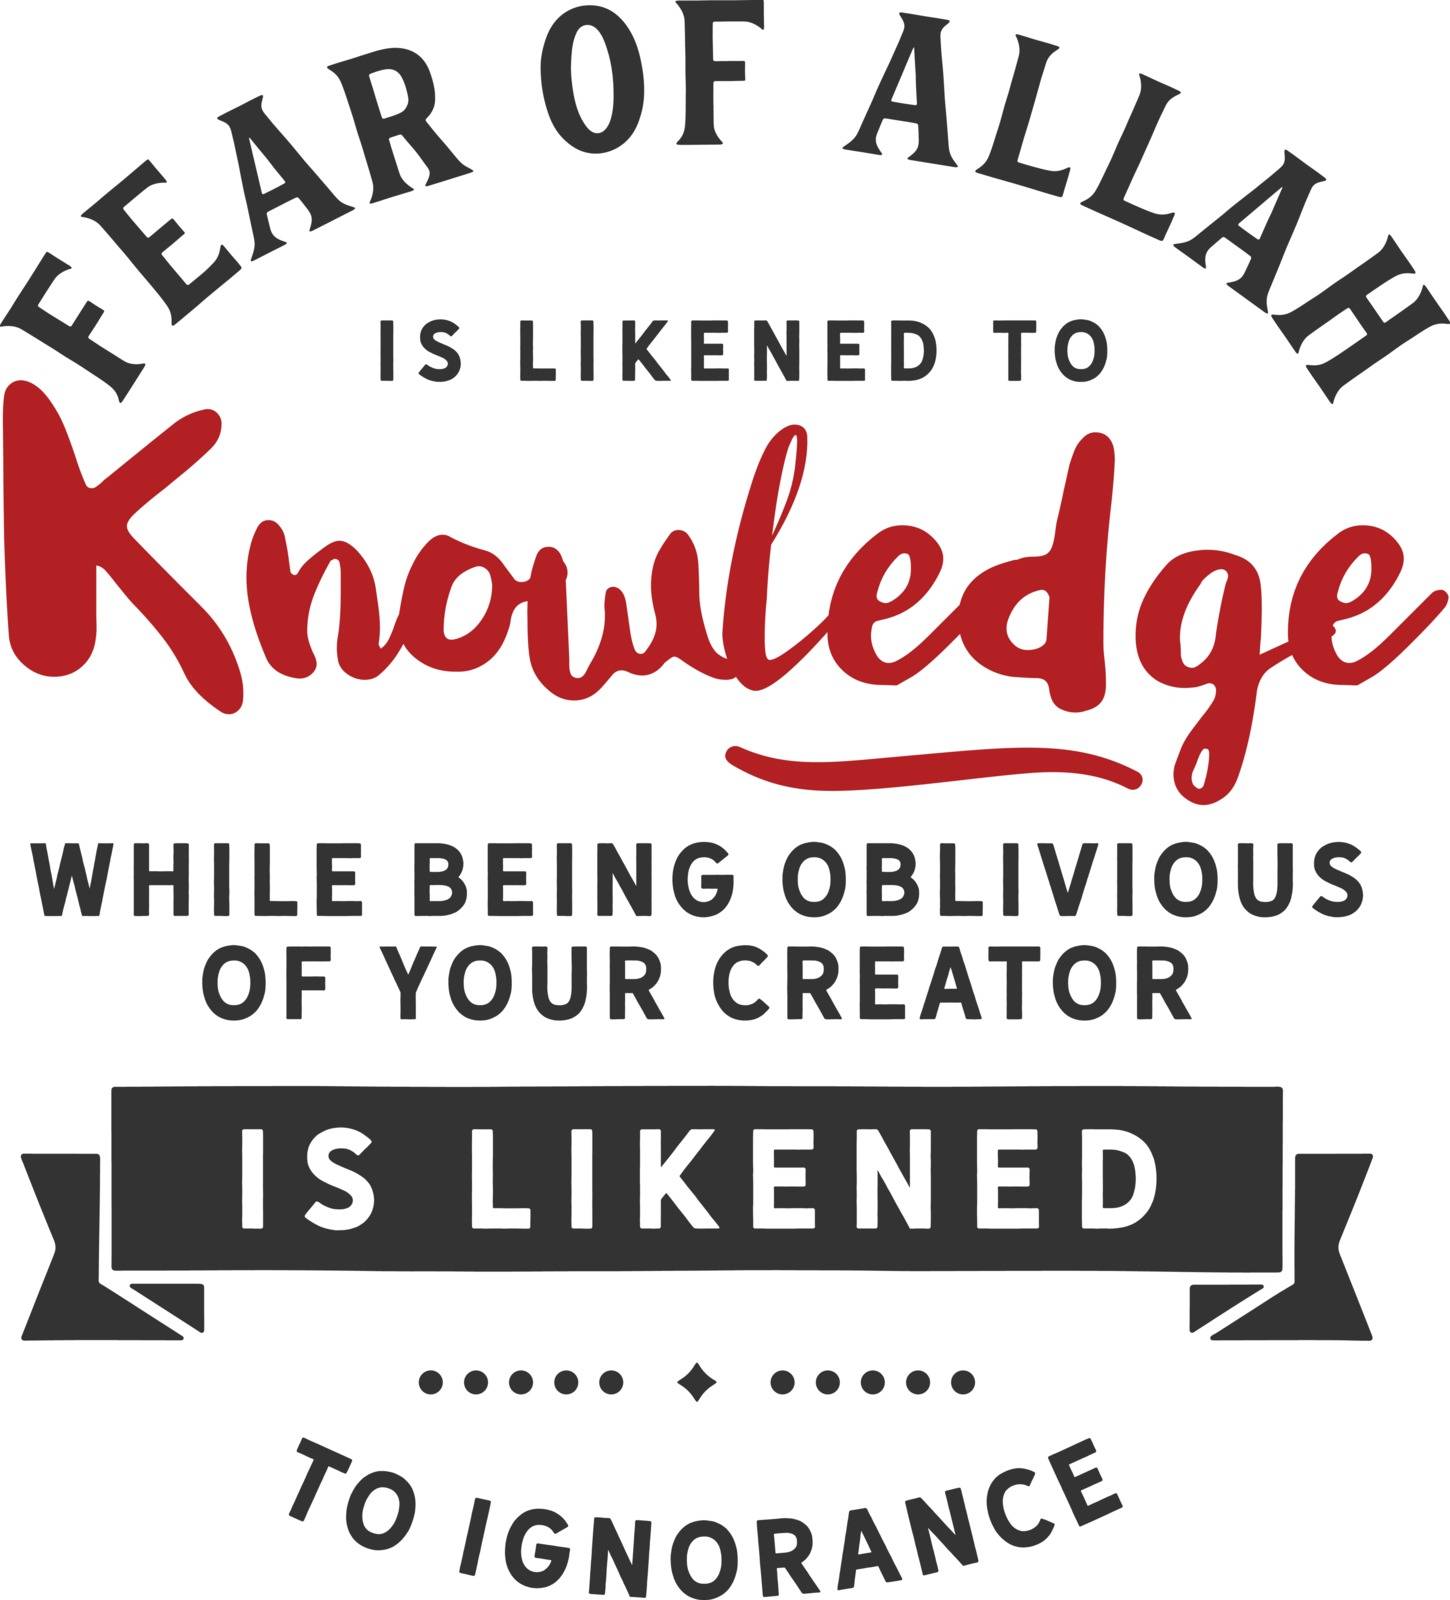 Fear of Allah is likened to knowledge while being oblivious of your Creator is likened to ignorance